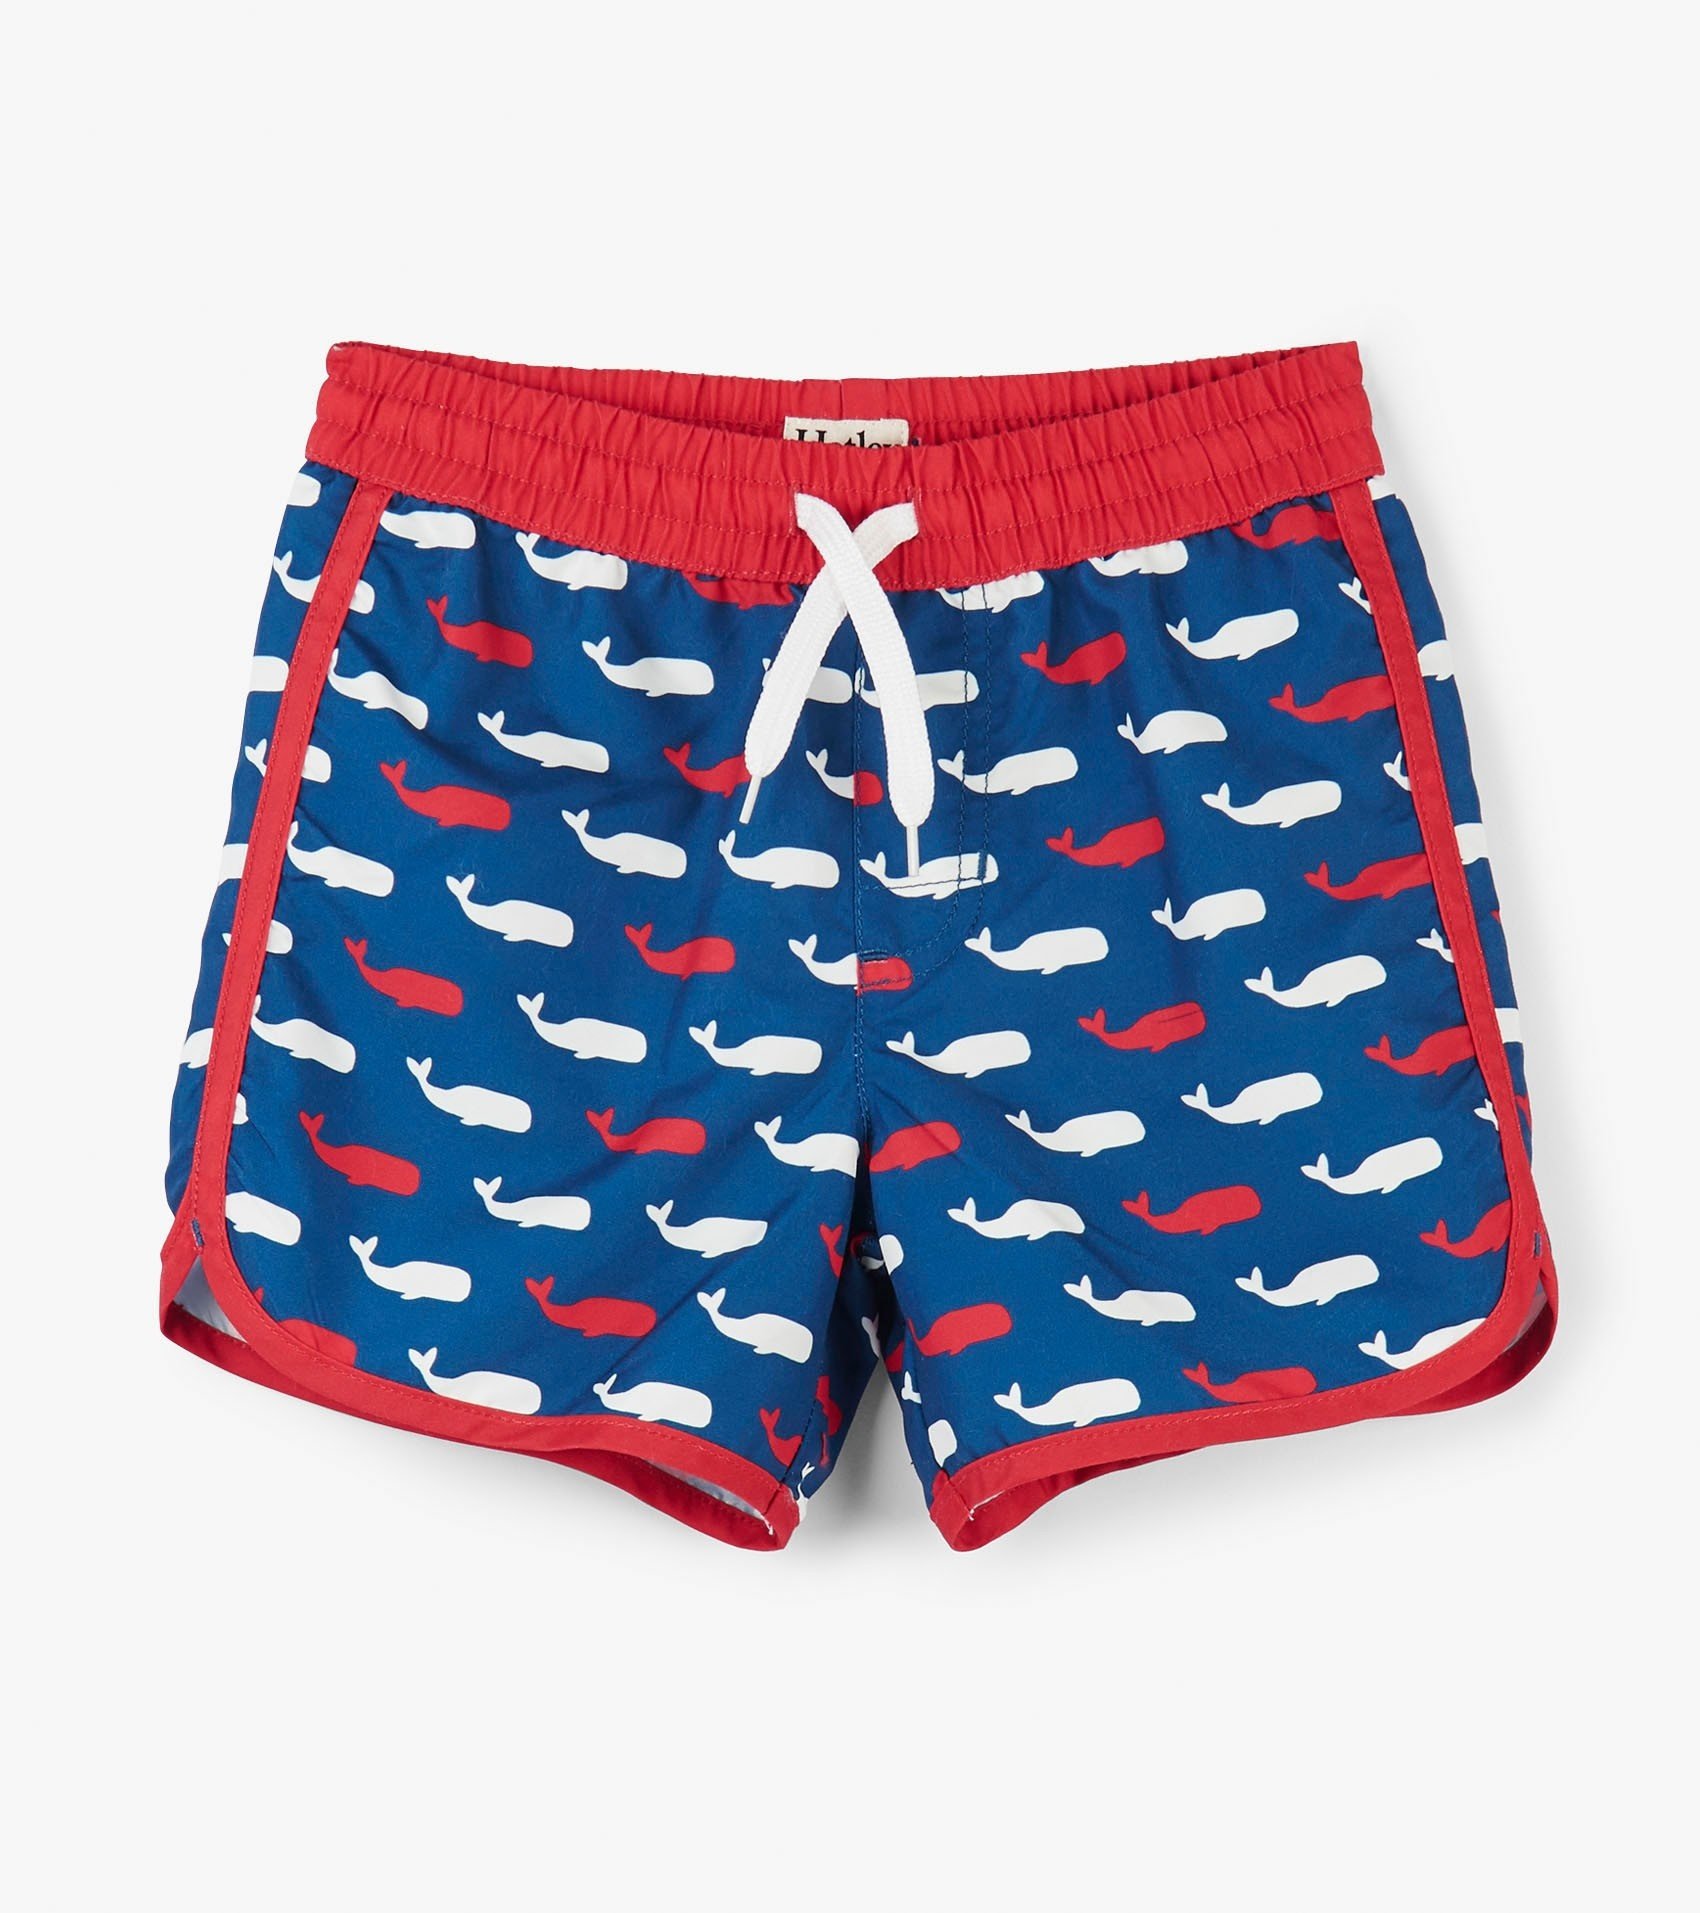 Boys Swim Trunks UPF 50 by Hatley in Victoria BC Canada at Abby Sprouts ...